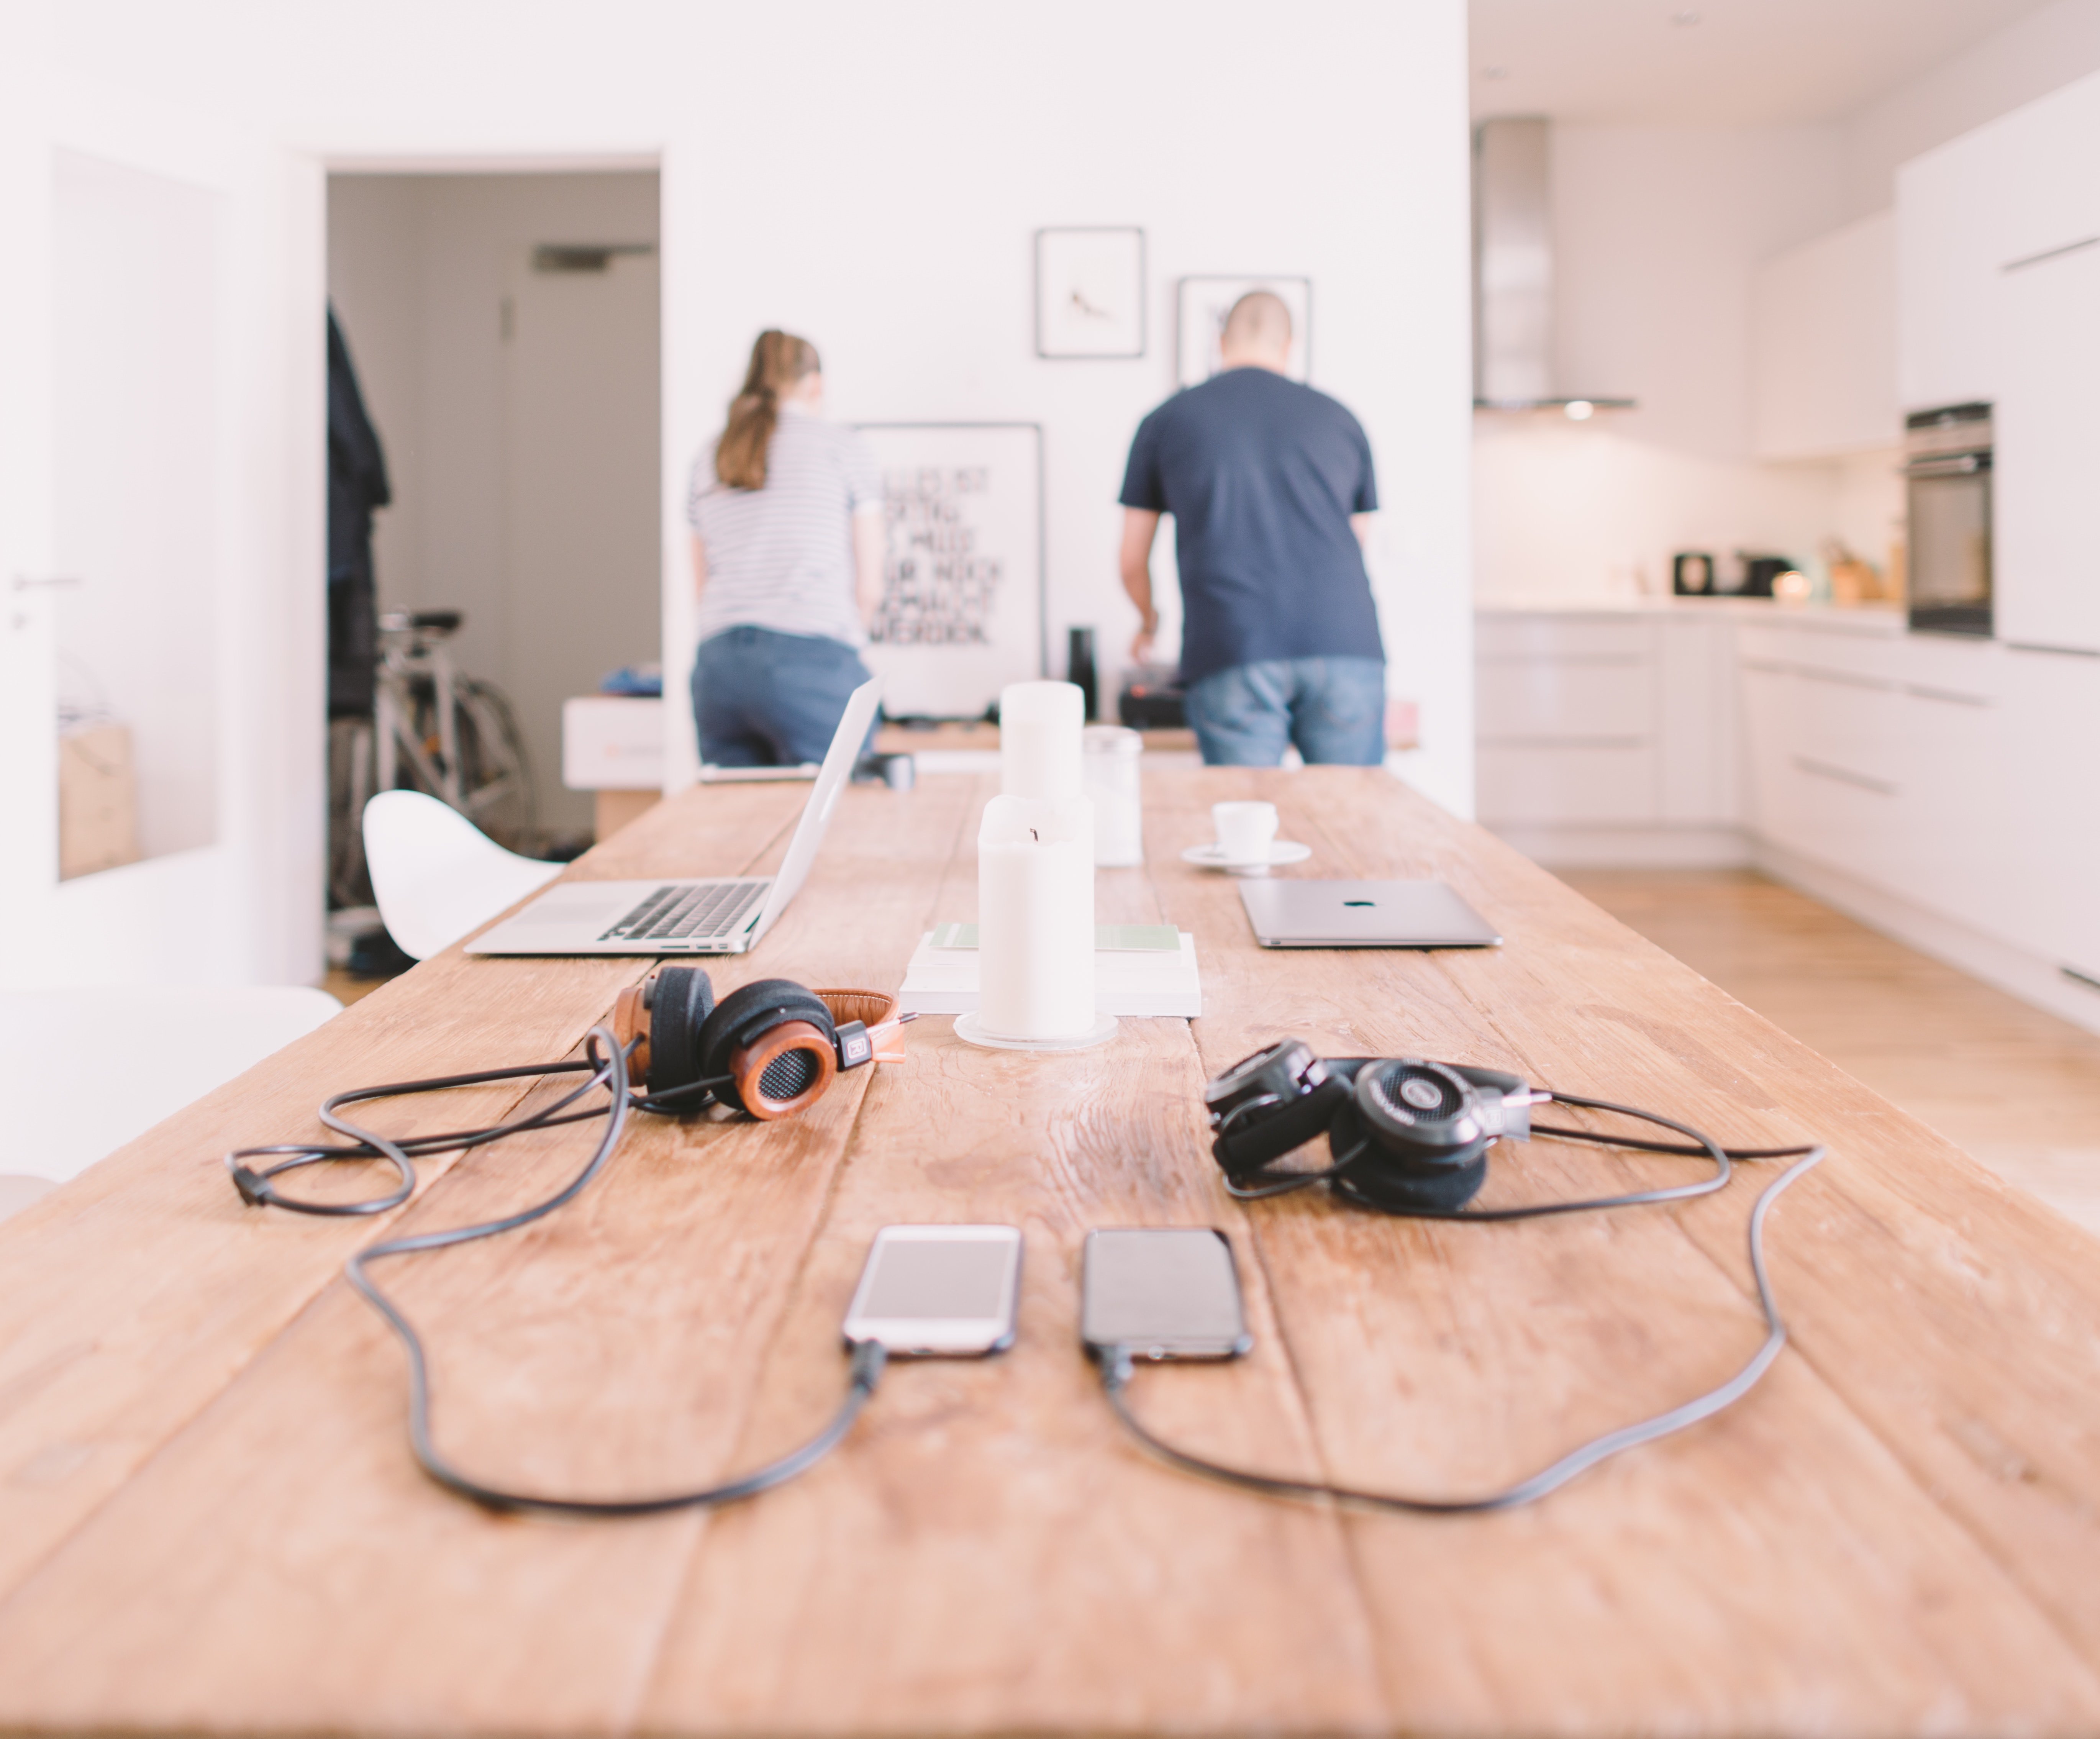 Two people working at the end of a room | Source: Unsplash